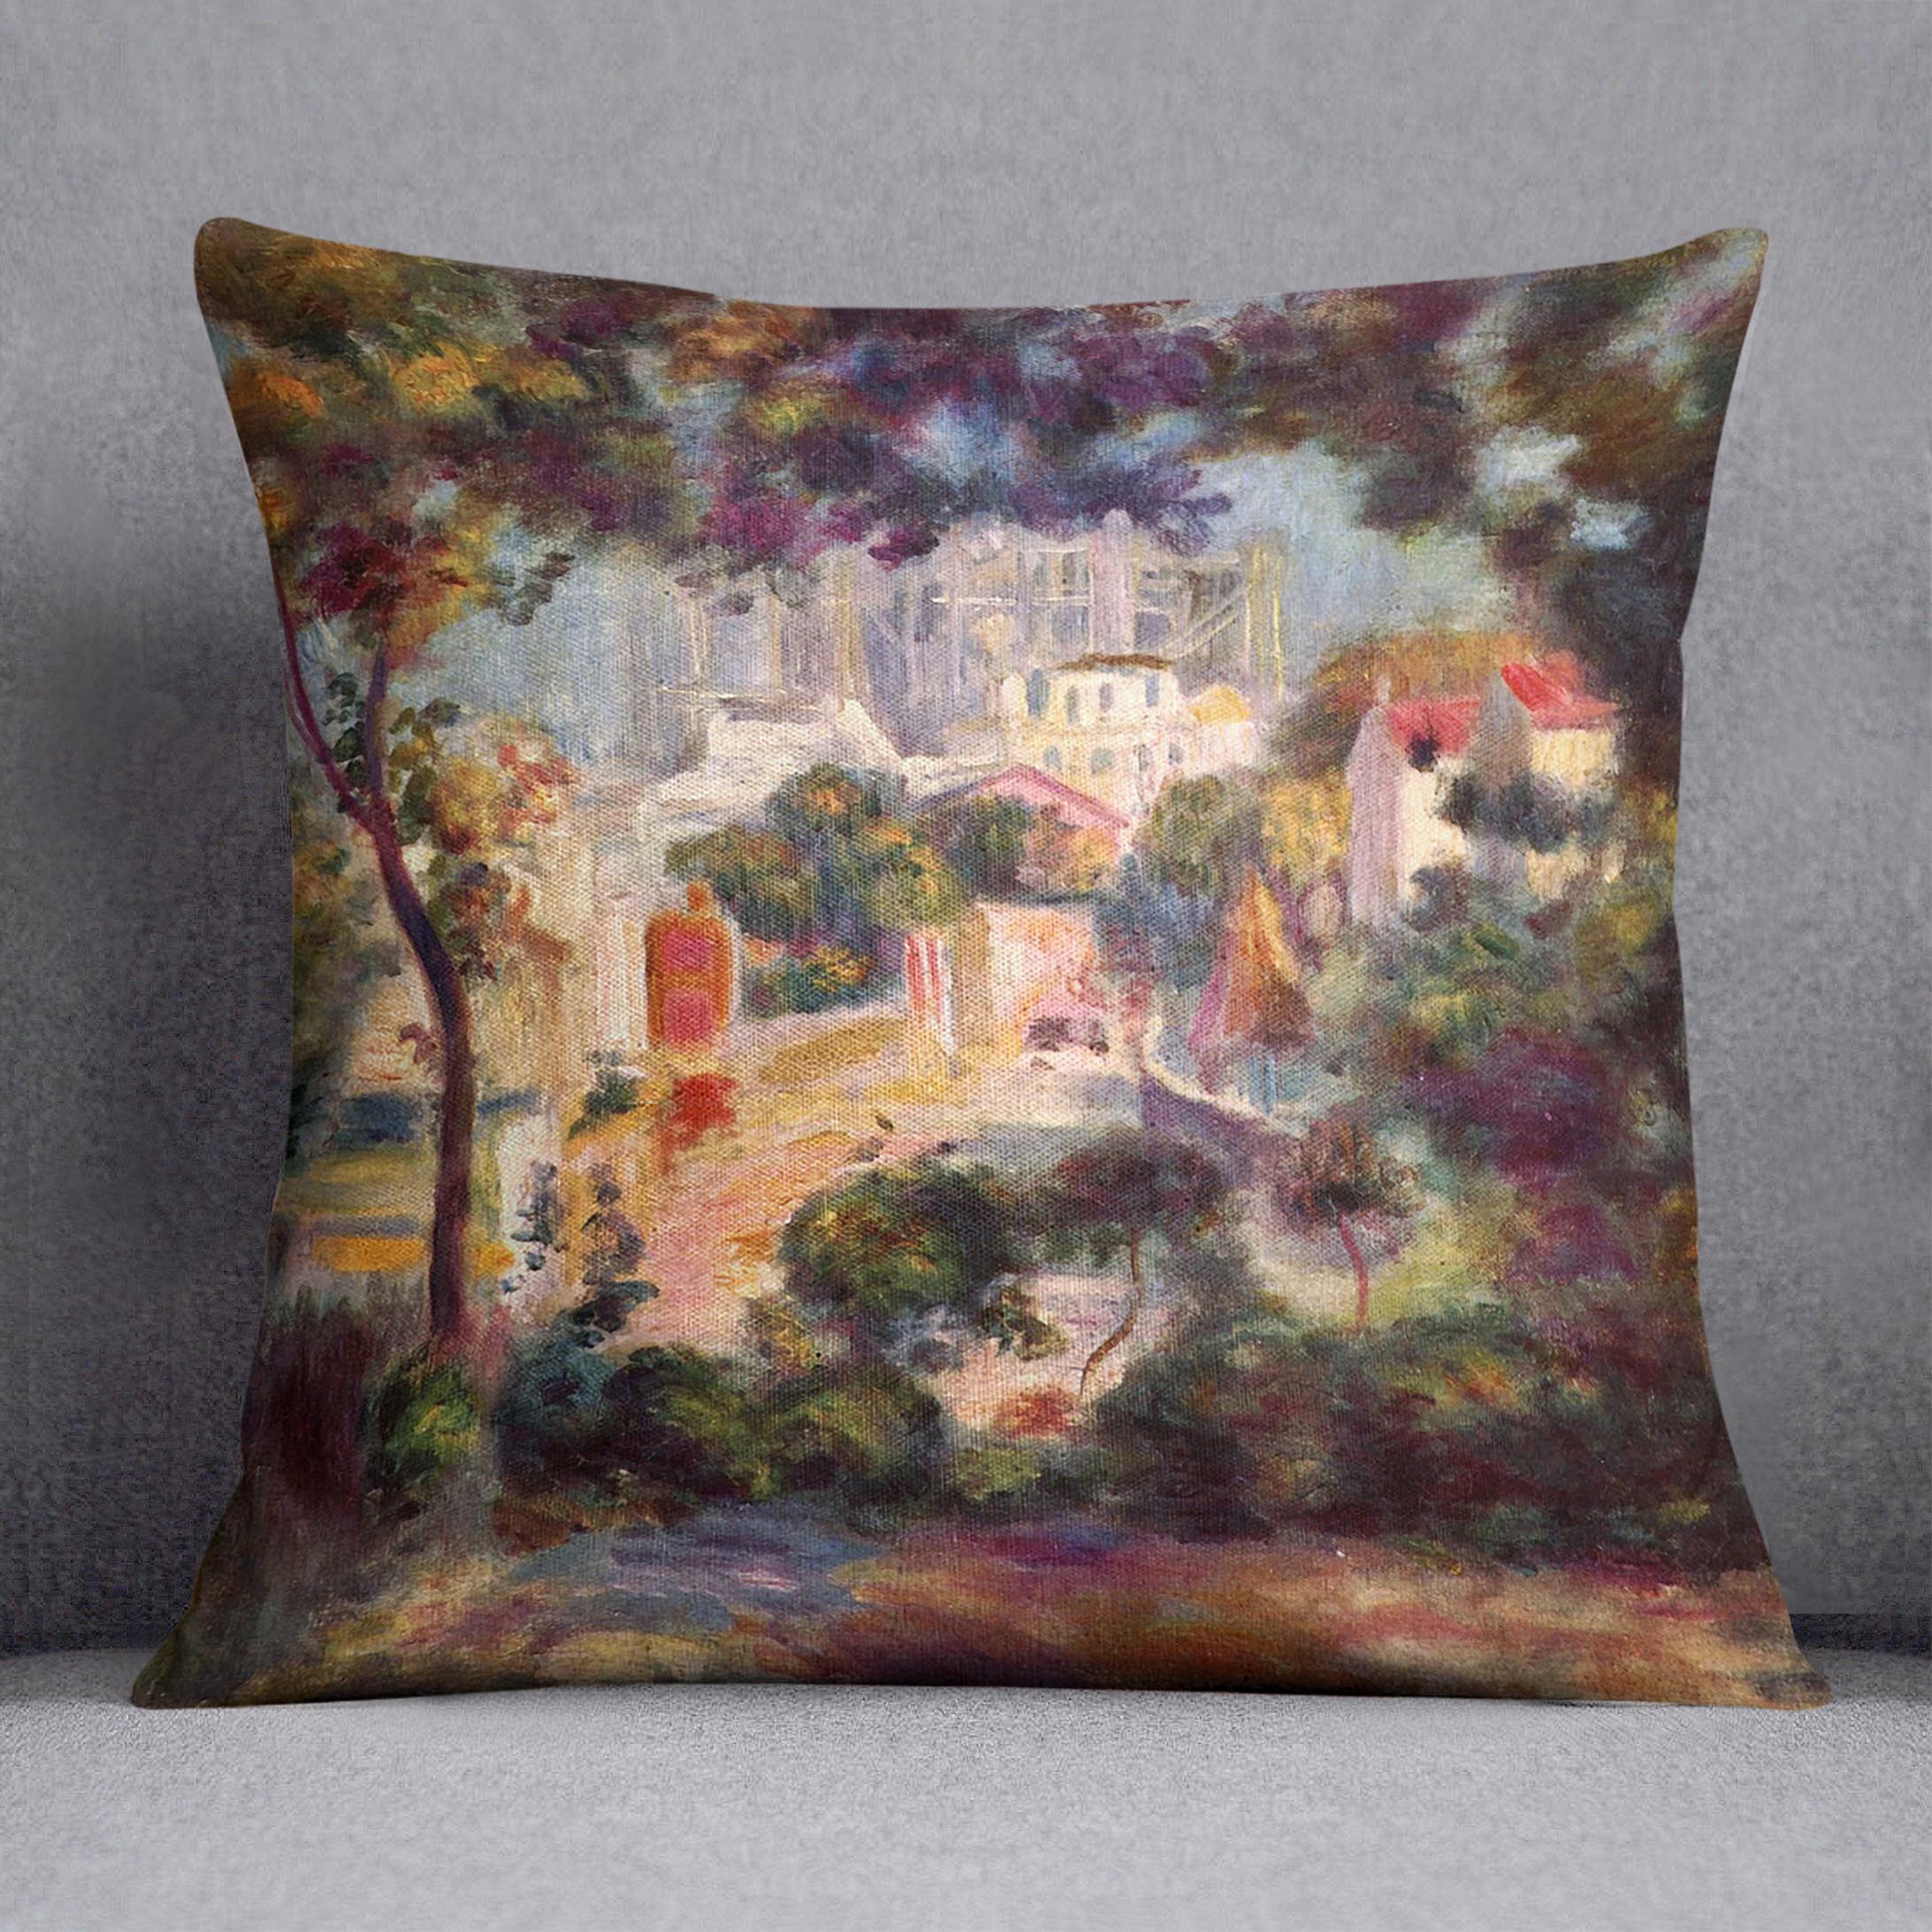 Landscape with the view of Sacre Coeur by Renoir Cushion